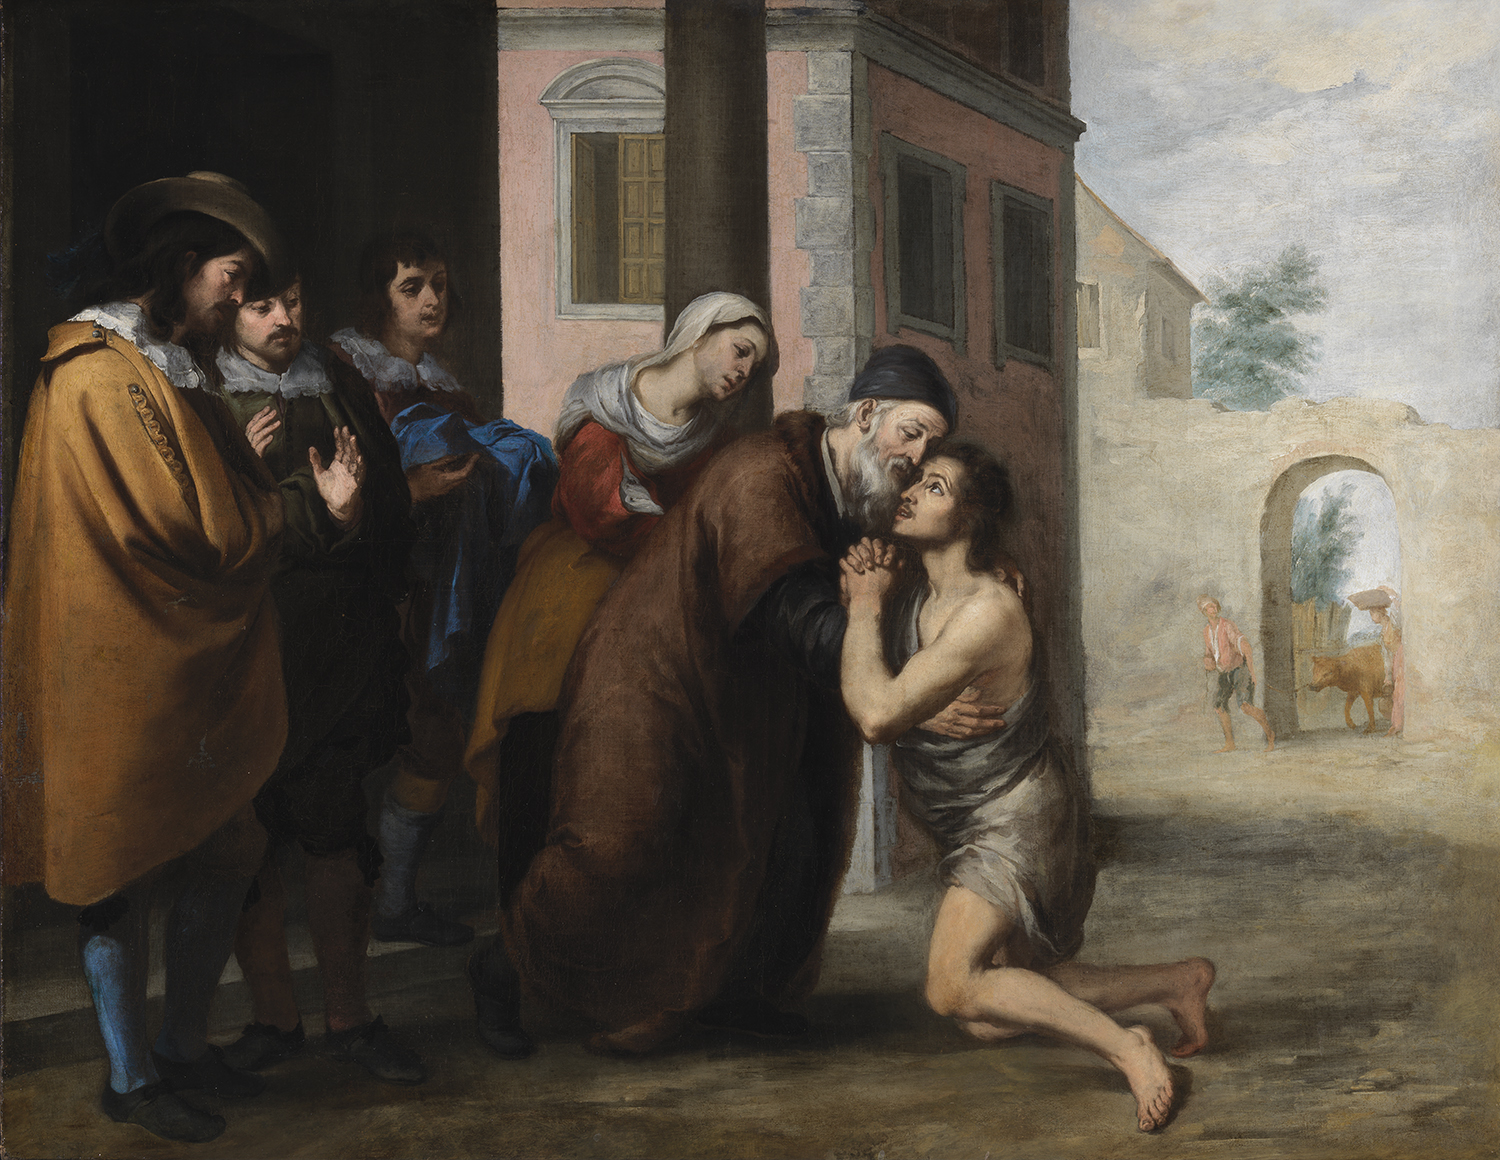 The Return of the Prodigal Son by Bartolomé Esteban Murillo - c.1660 - 104.5 x 134.5 cm National Gallery of Ireland